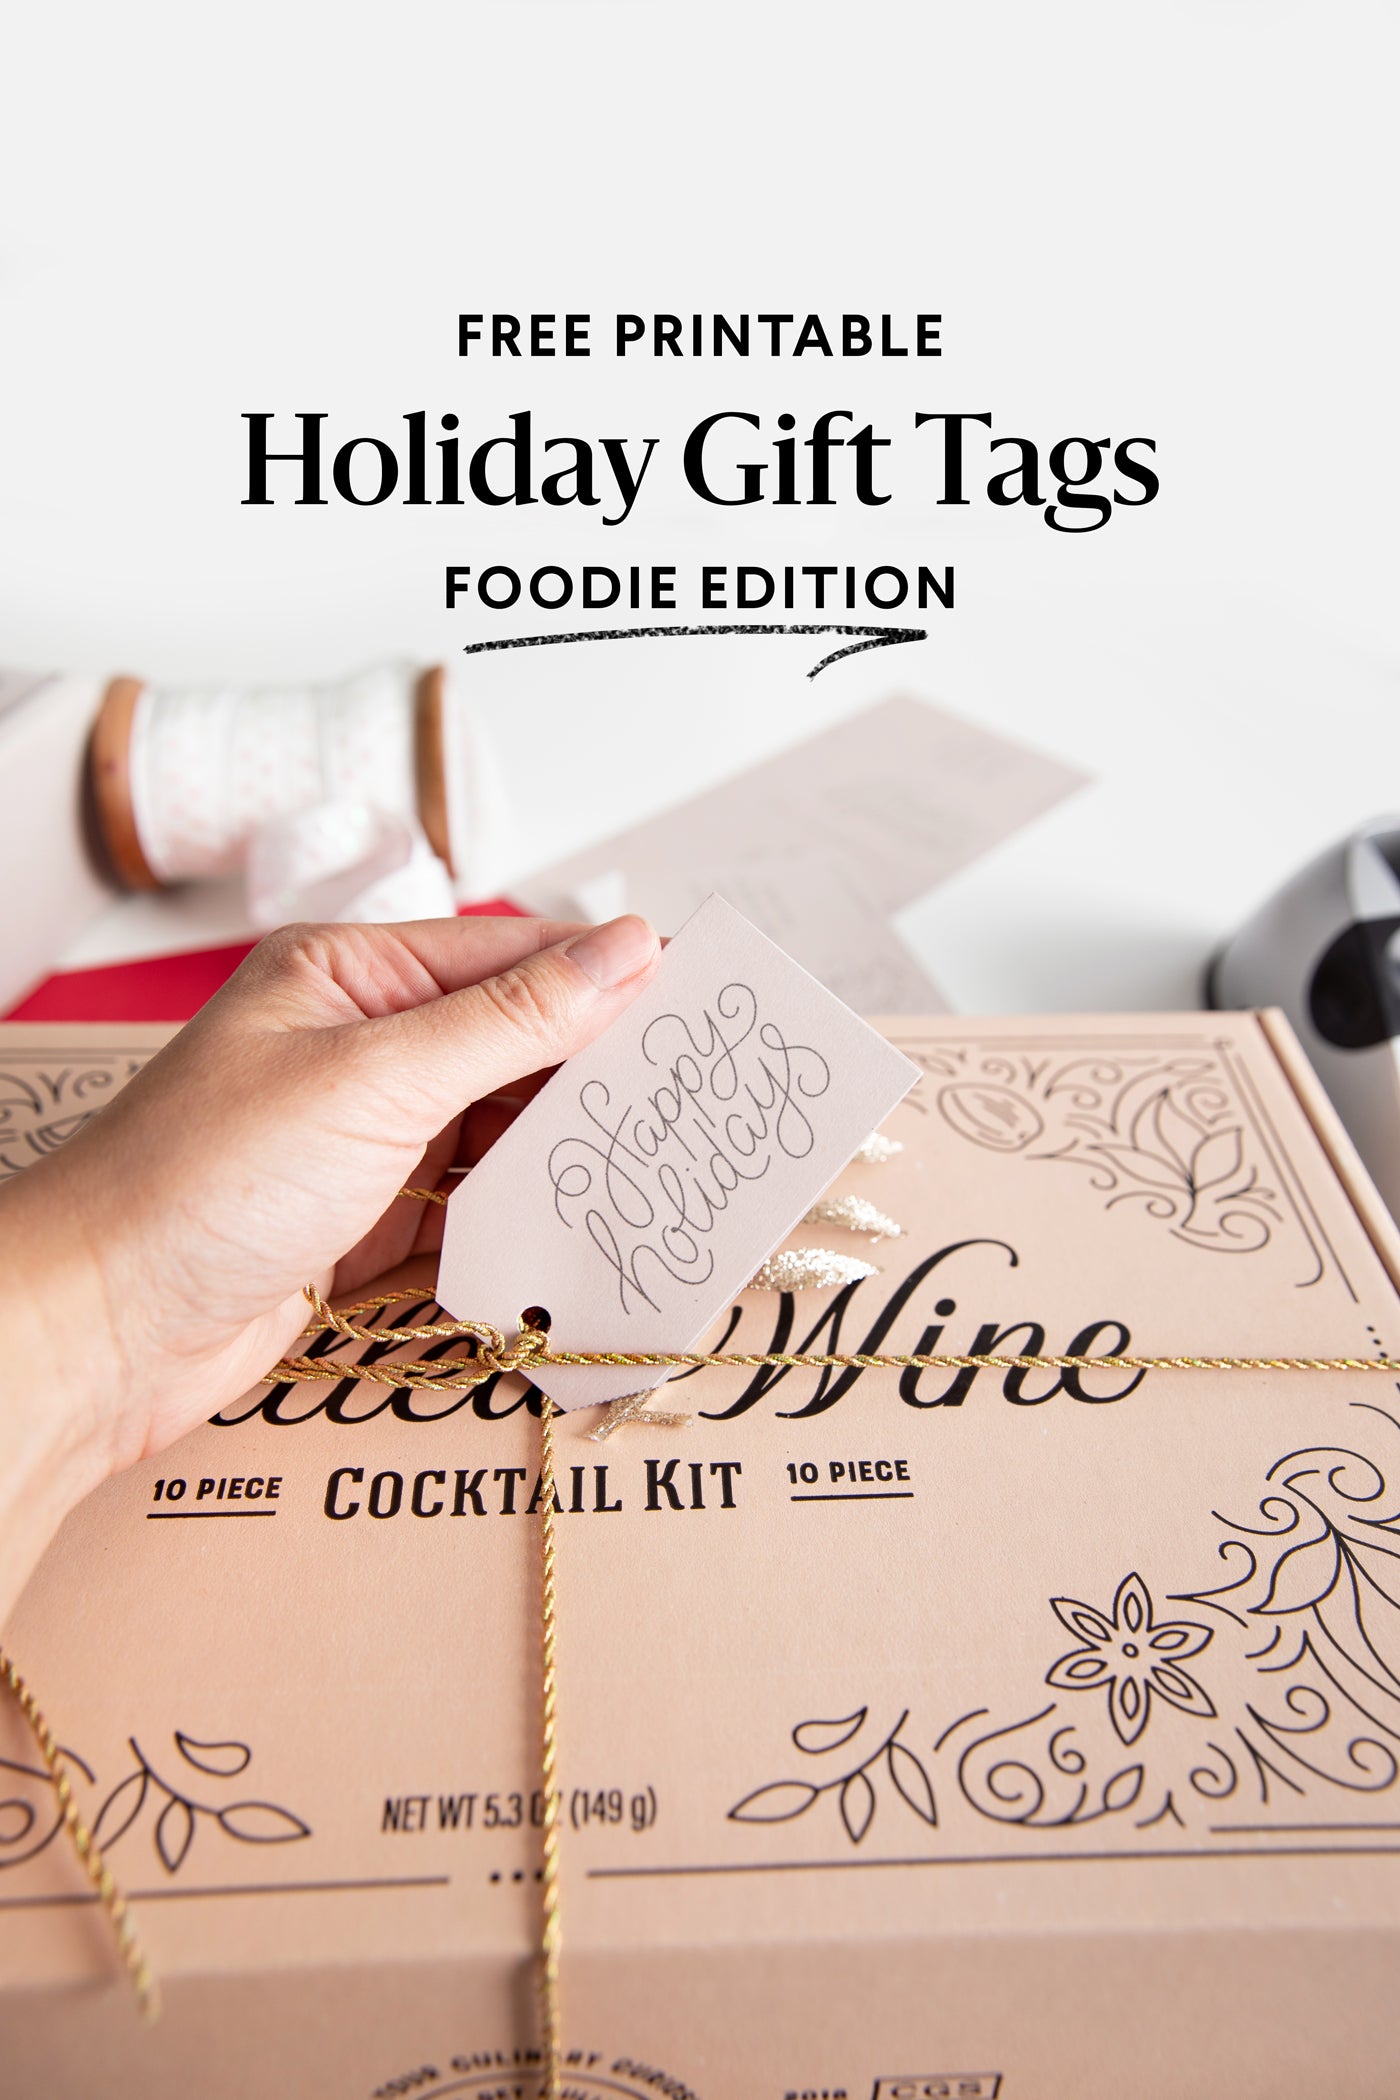 Holiday Gift Tags, foodie edition, free to print